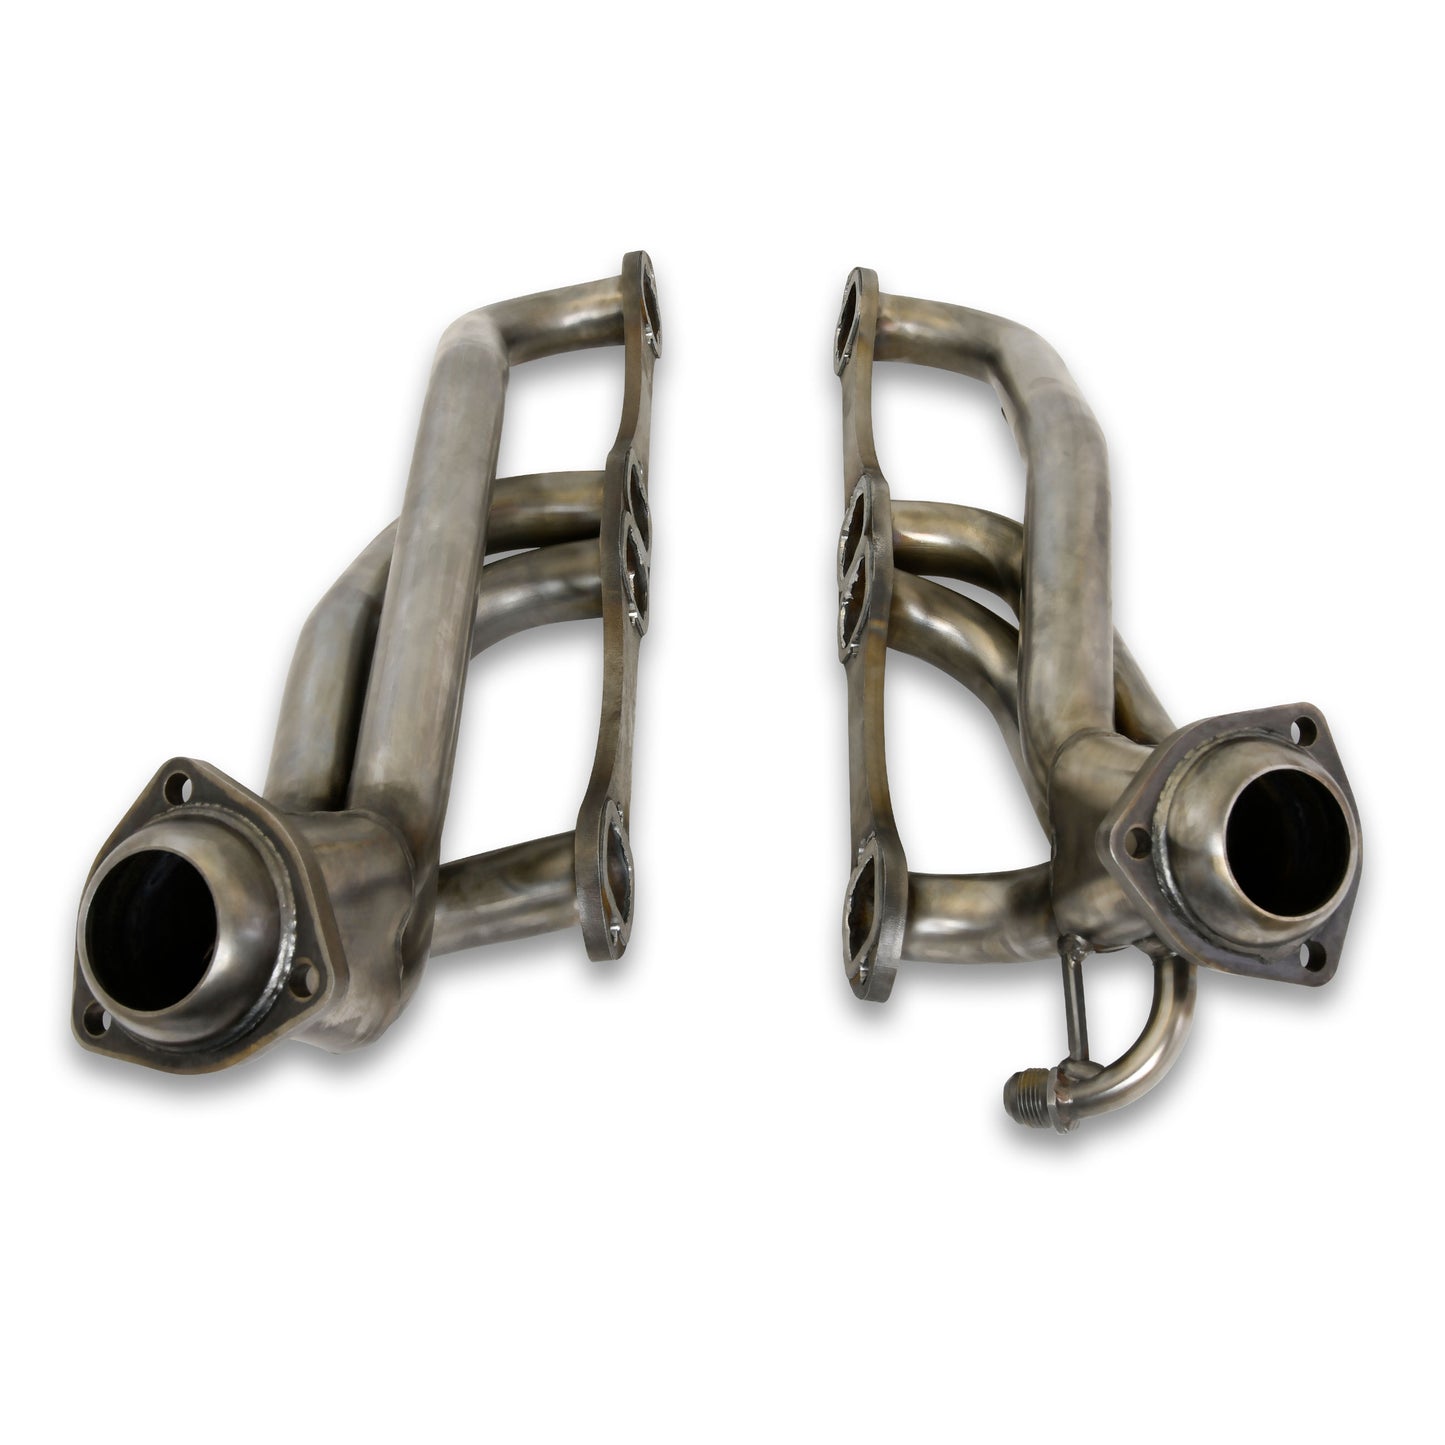 JBA Performance Exhaust 1832S 1 1/2" Header Shorty Stainless Steel 96-99 GM Truck 5.0L and 5.7L